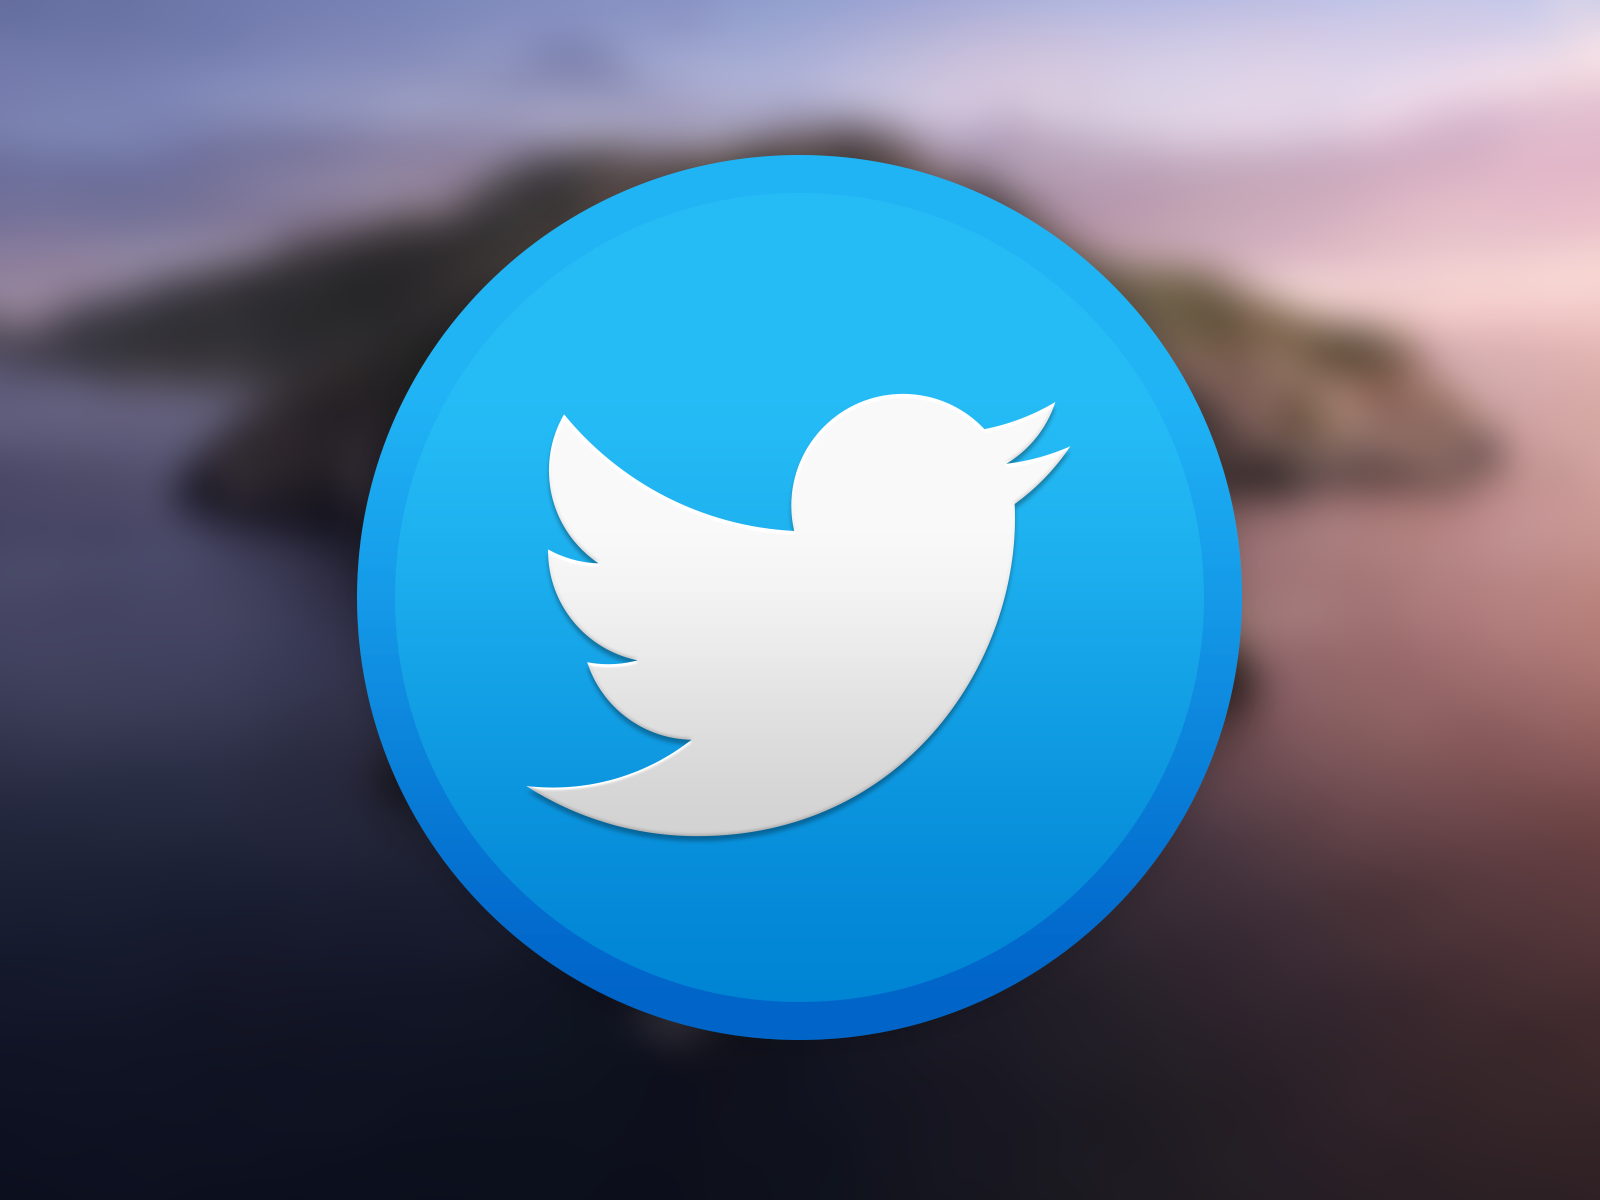 twitter download for mac